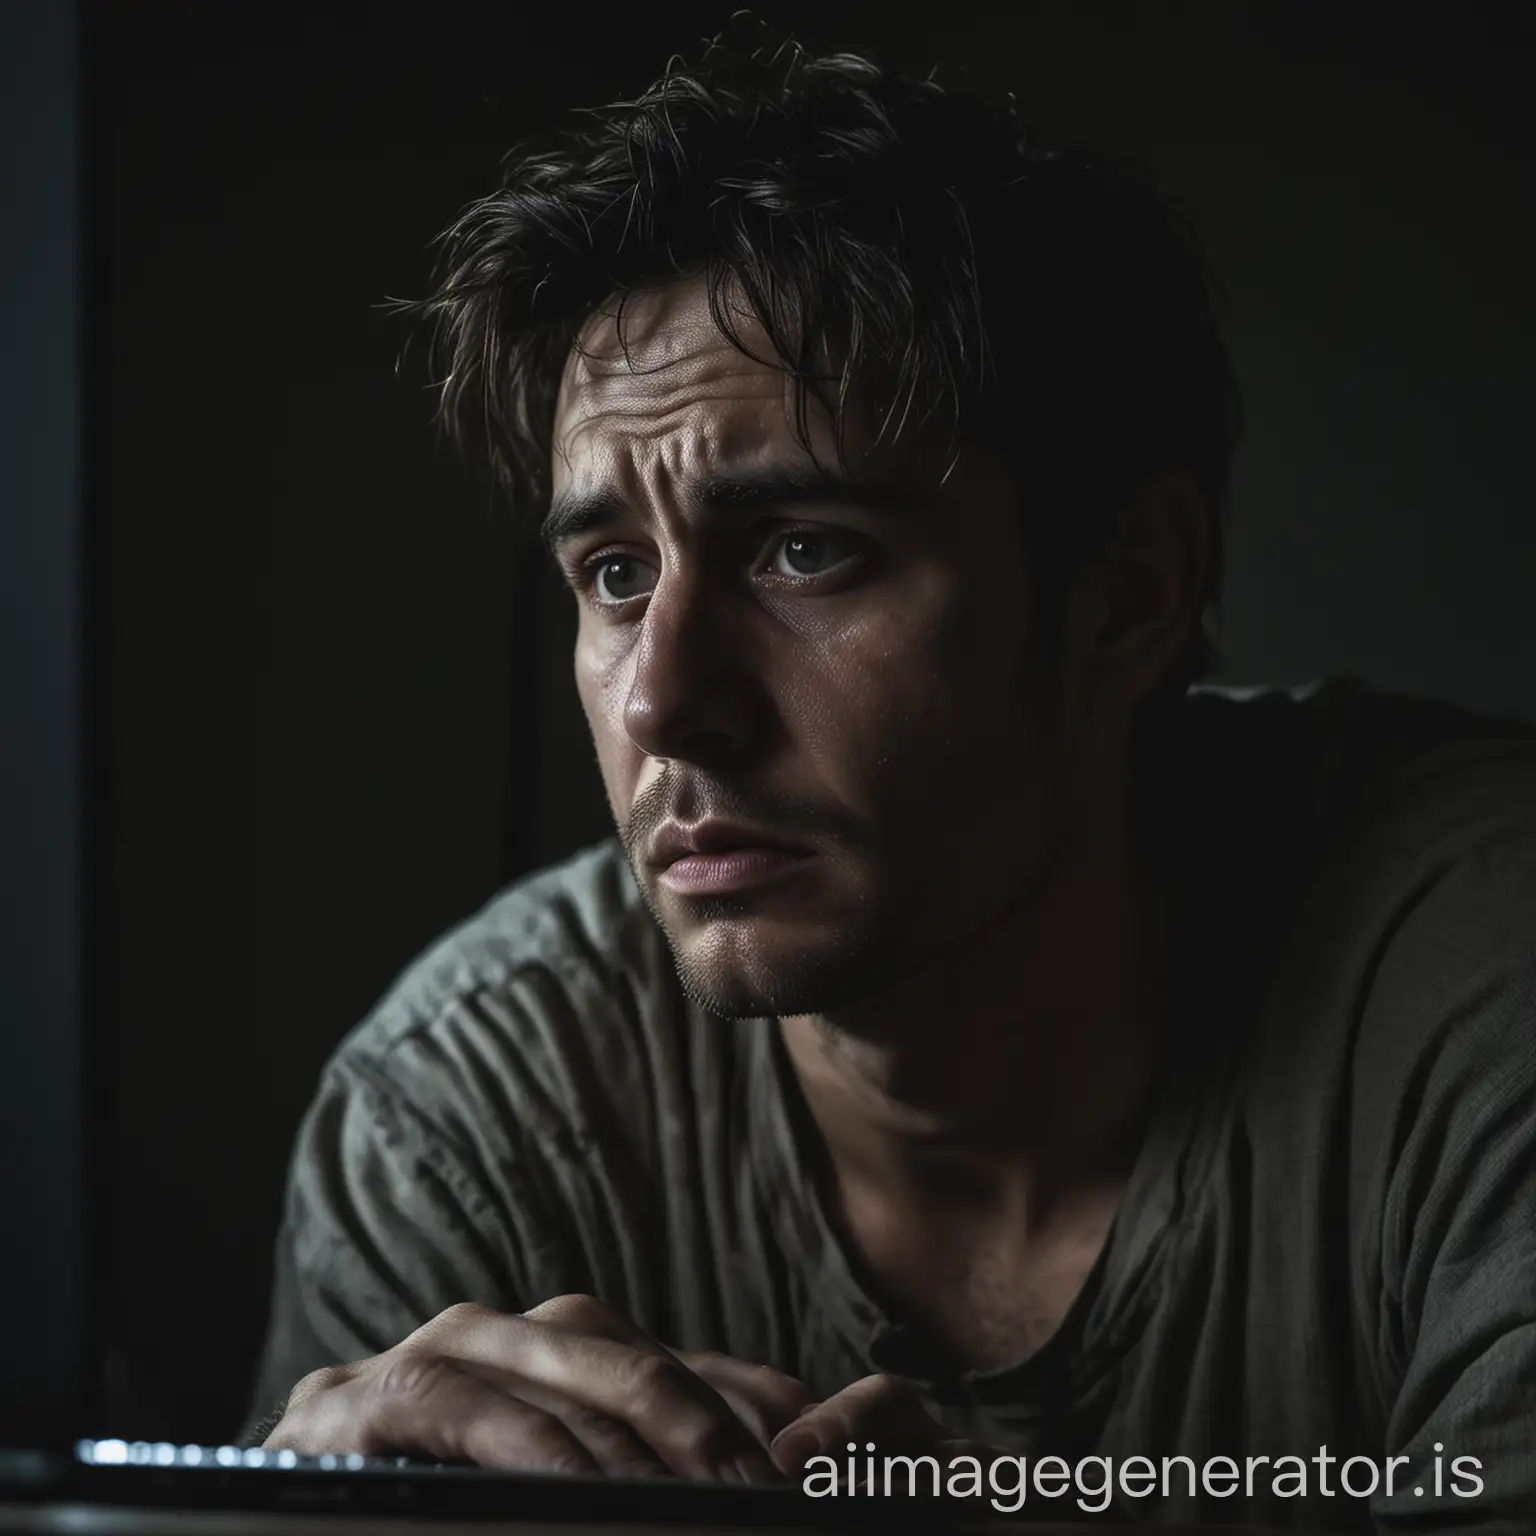 A poor man without money sitting in front of a computer screen. The room is dark. The screen illuminates the face of the man. The man looks sad, desperate and lonely. The picture shows his face up close.